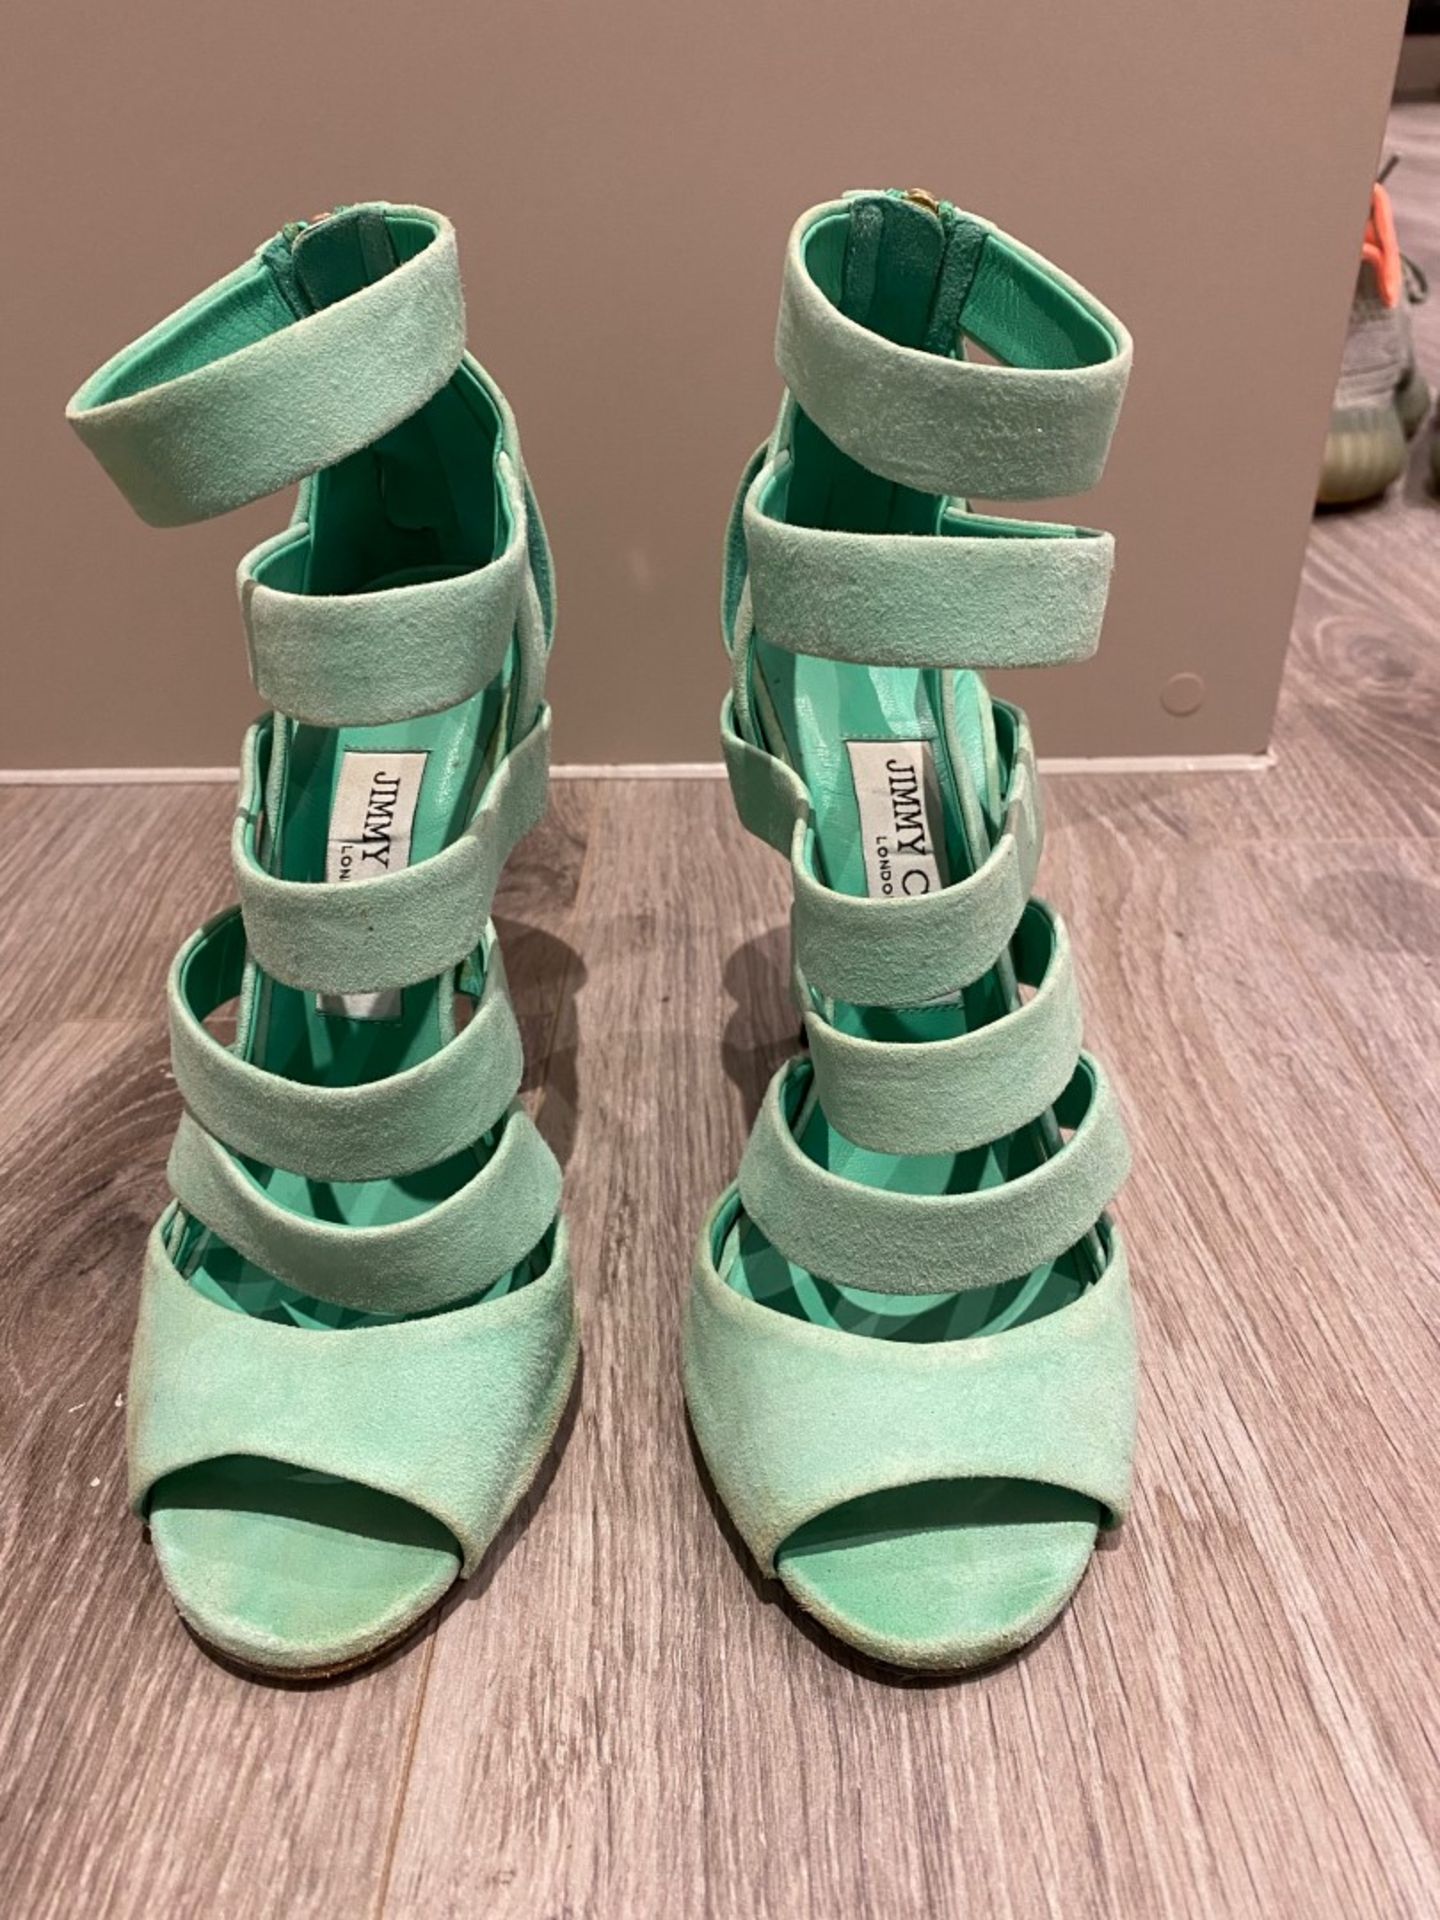 1 x Pair Of Genuine Jimmy Choo High Heel Shoes In Mint Green - Size: 36 - Preowned in Worn Condition - Image 2 of 6